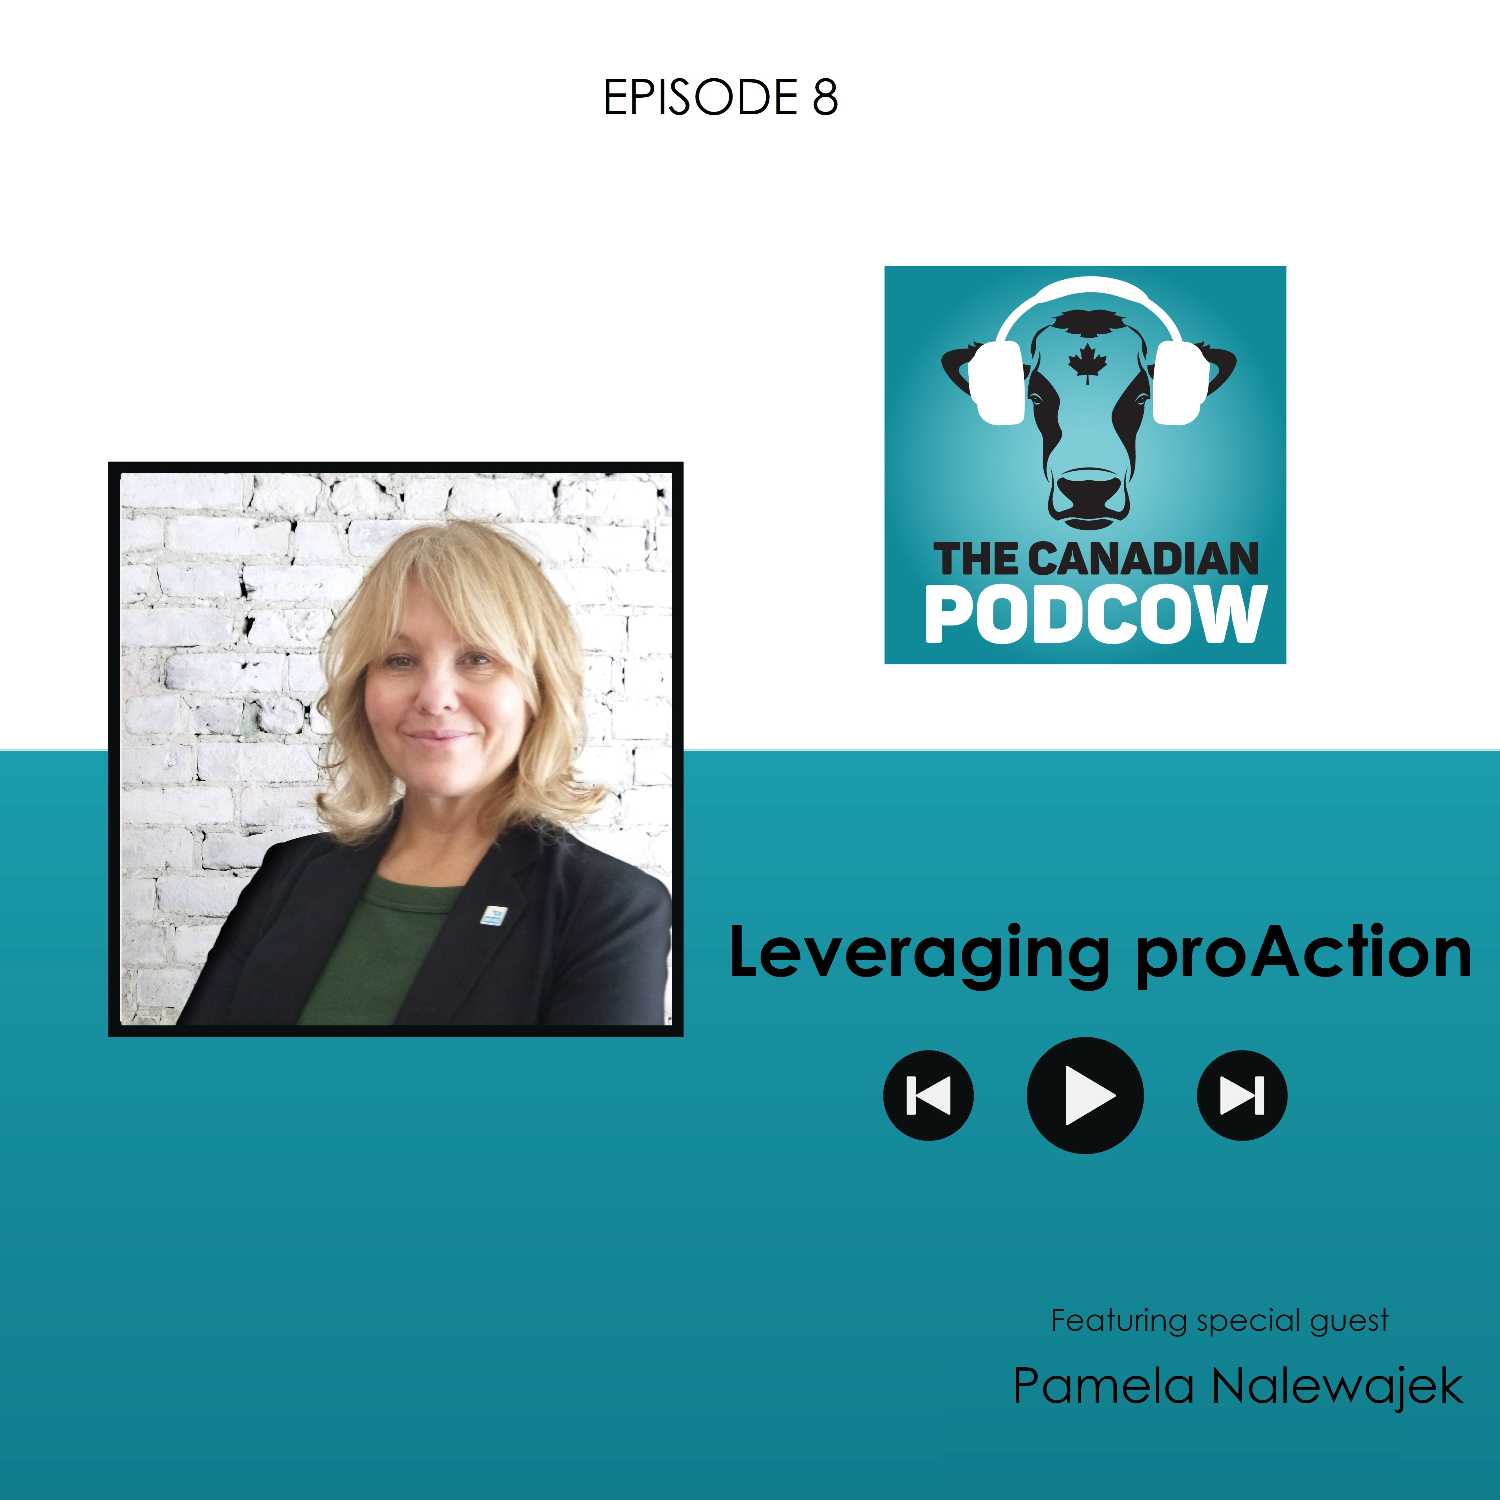 Leveraging proAction